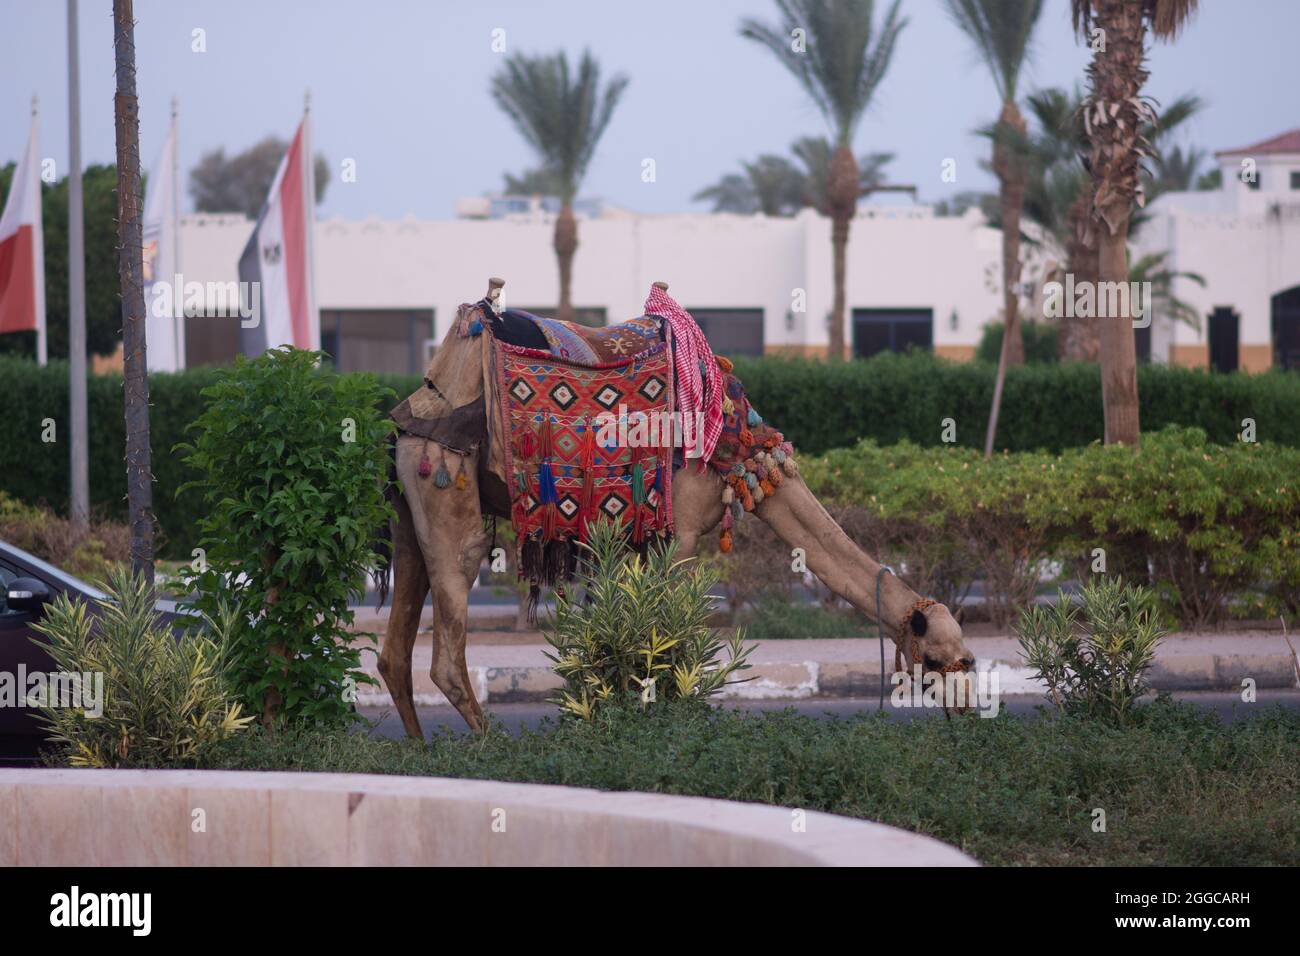 a camel eats grass. a camel in national Egyptian clothes on the territory of the hotel.  Stock Photo